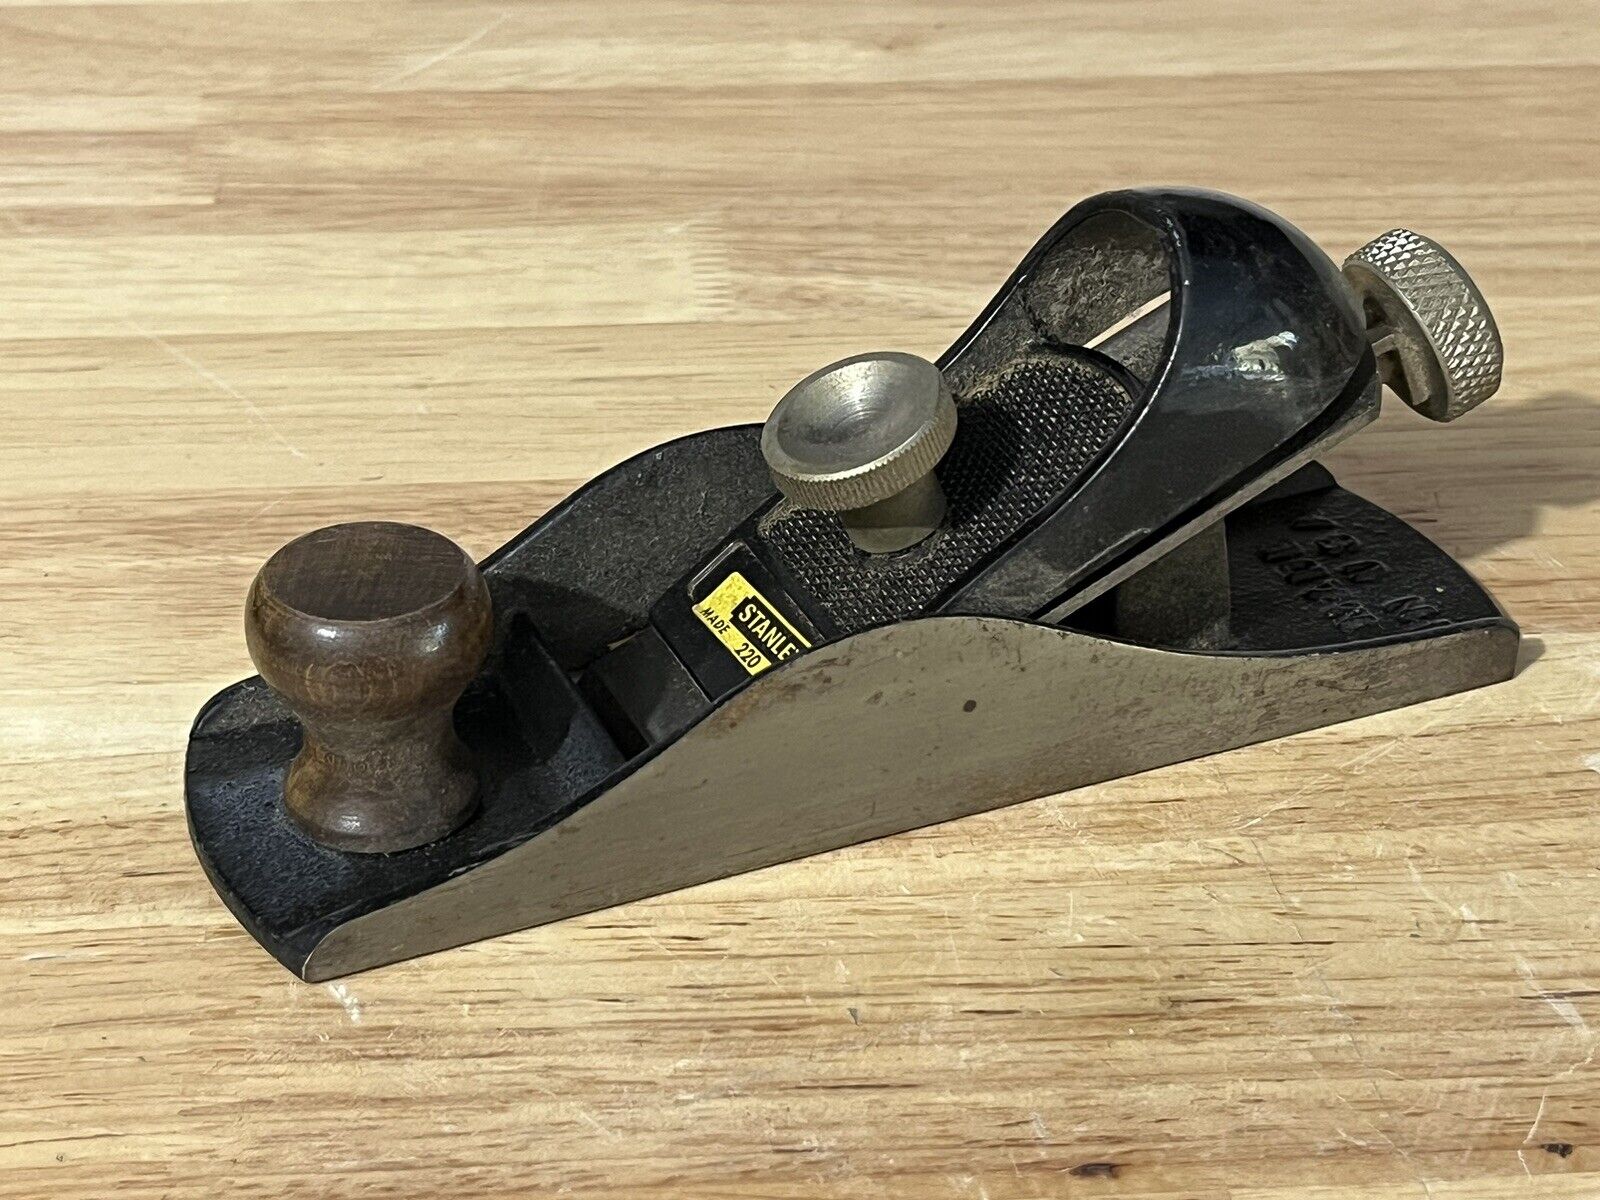 Stanley Tools No. 220 Block Plane Woodworking Tool 13-220A USA